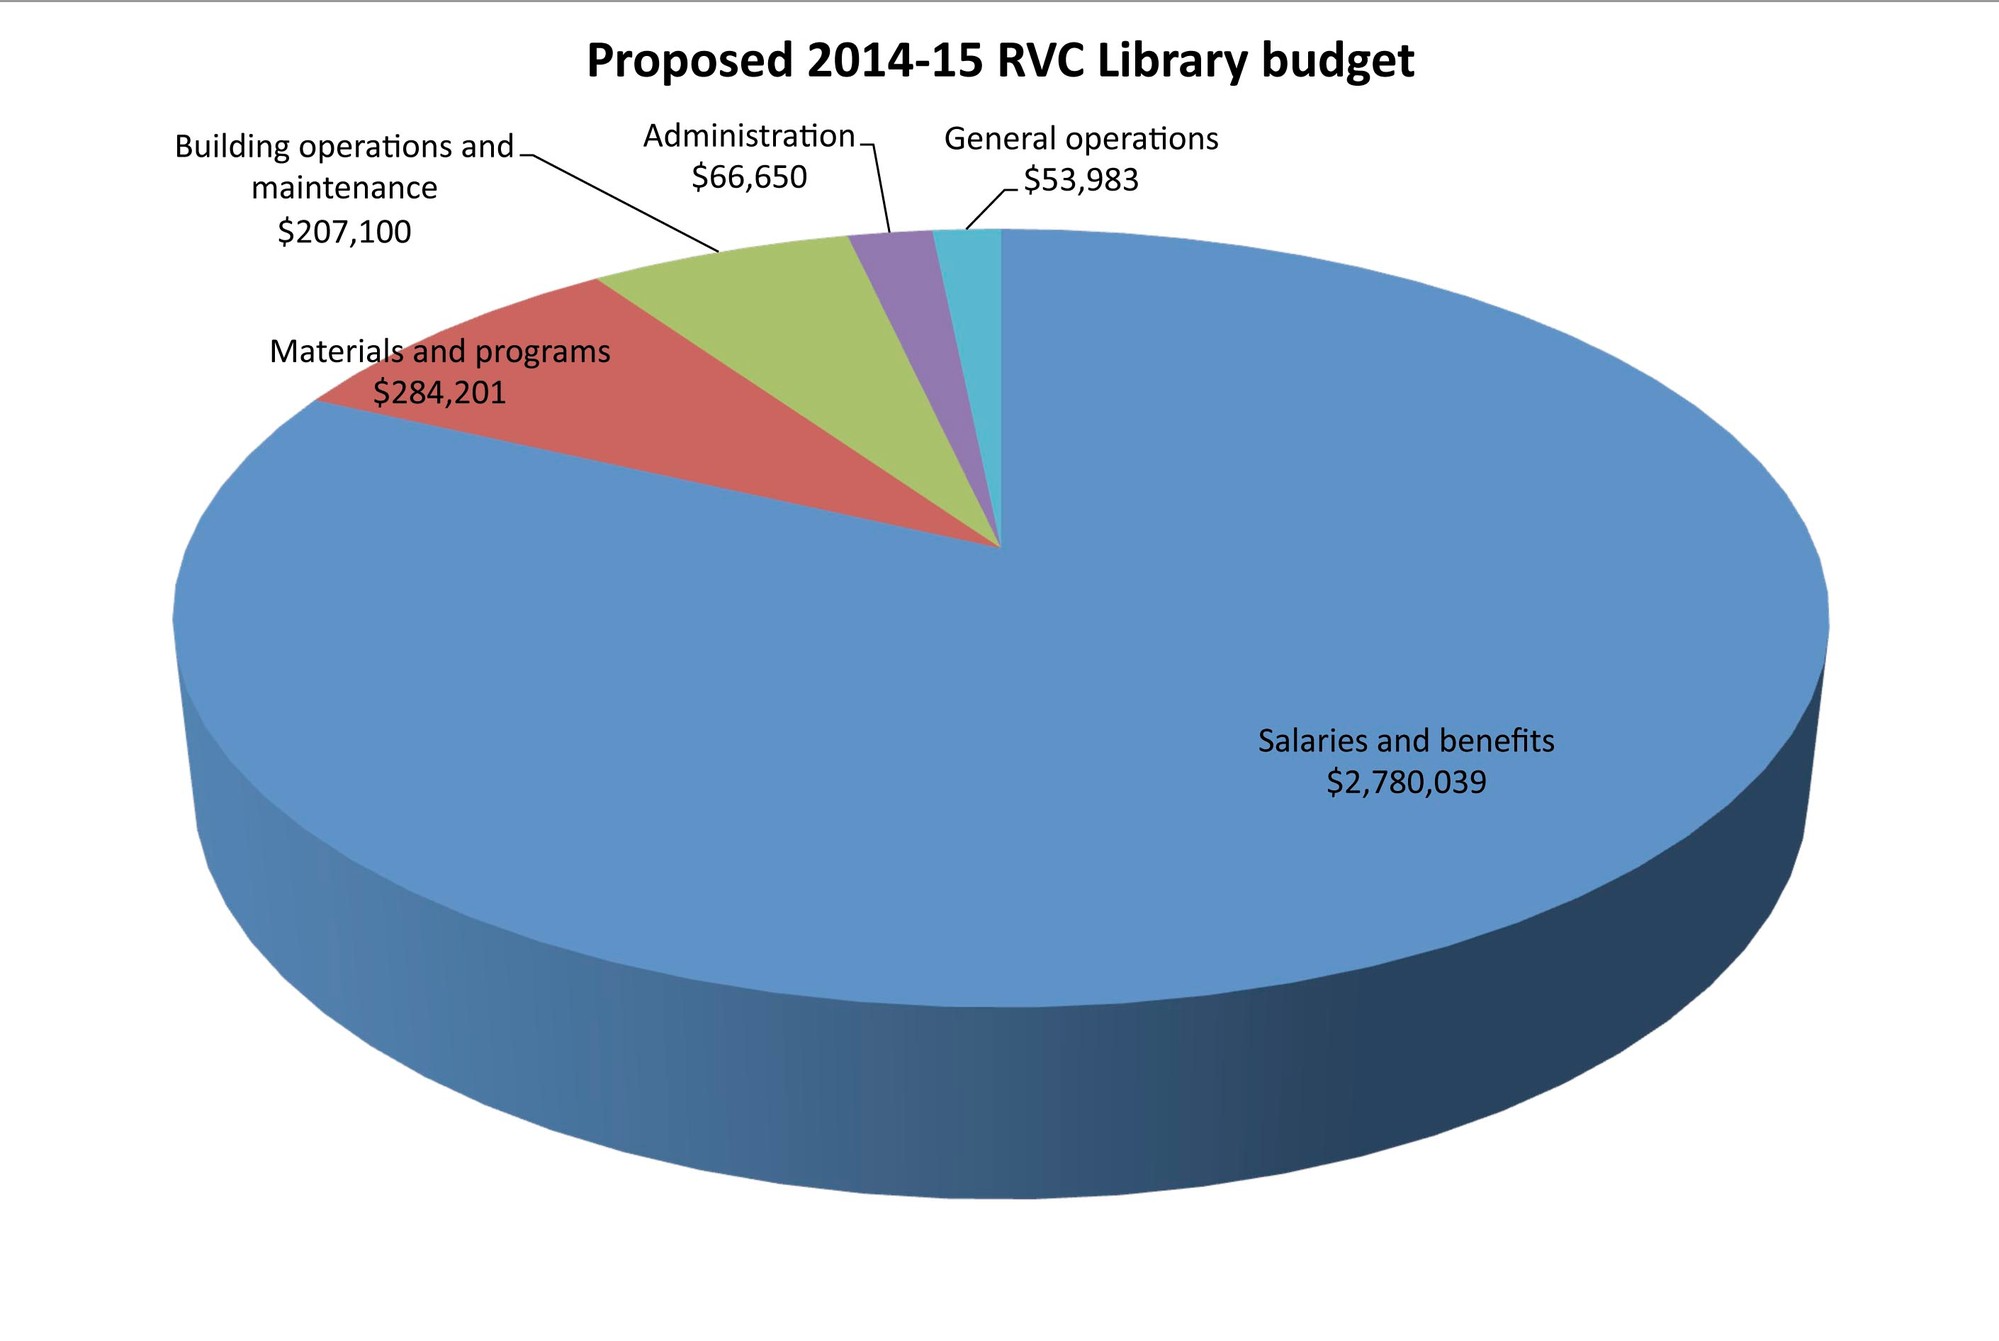 The growing library budget would equate to a tax increase of about $7.50 for the average household.